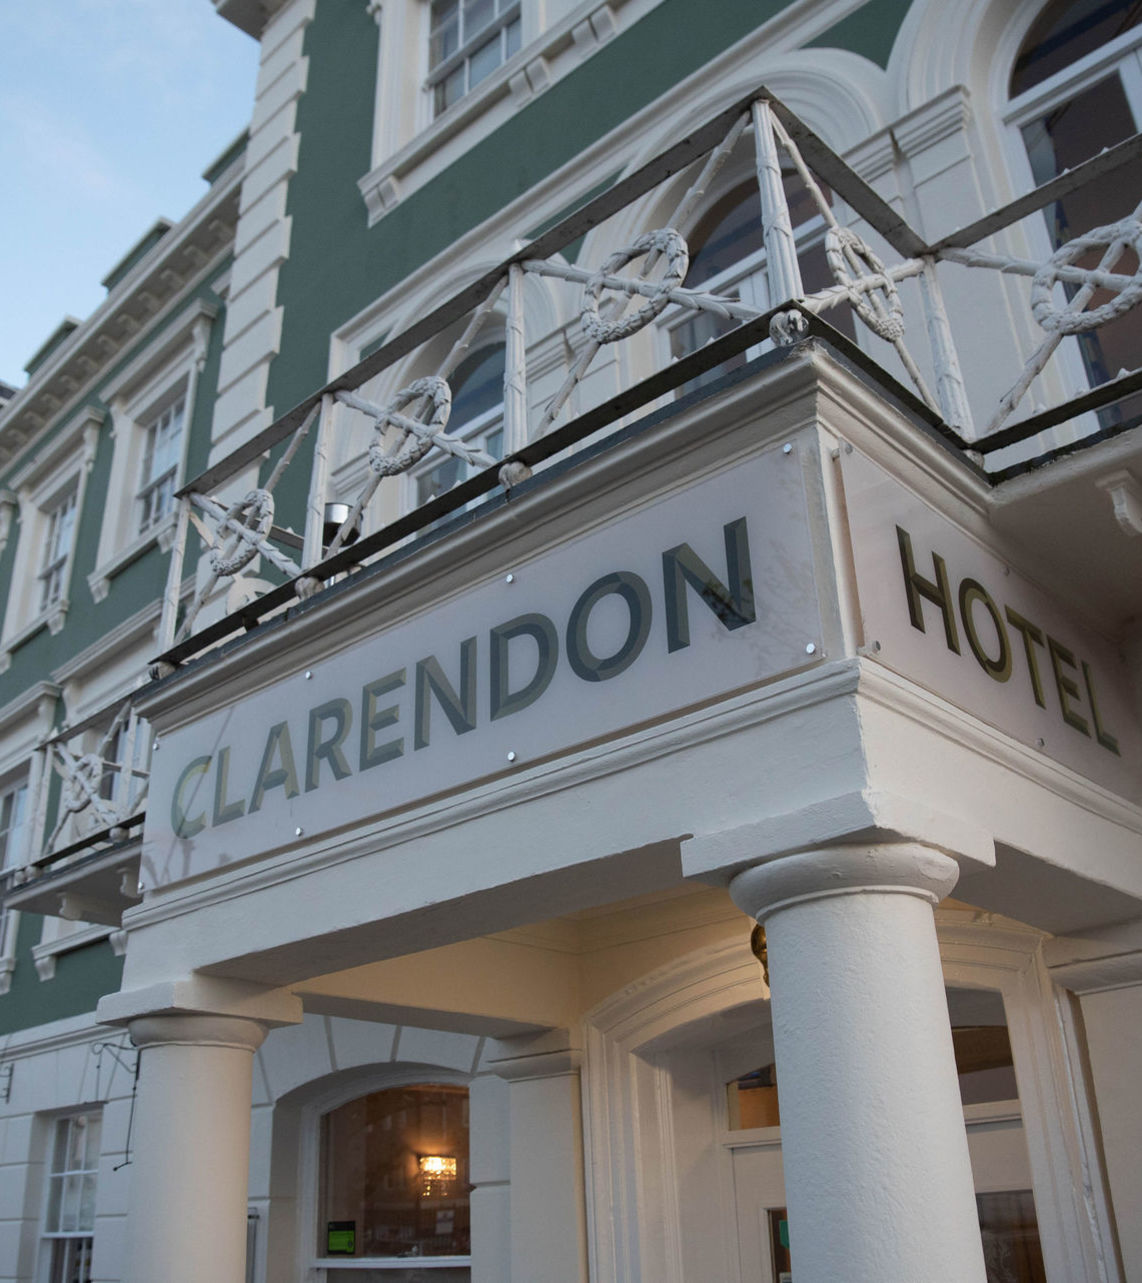 the Clarendon Hotel in Gravesend